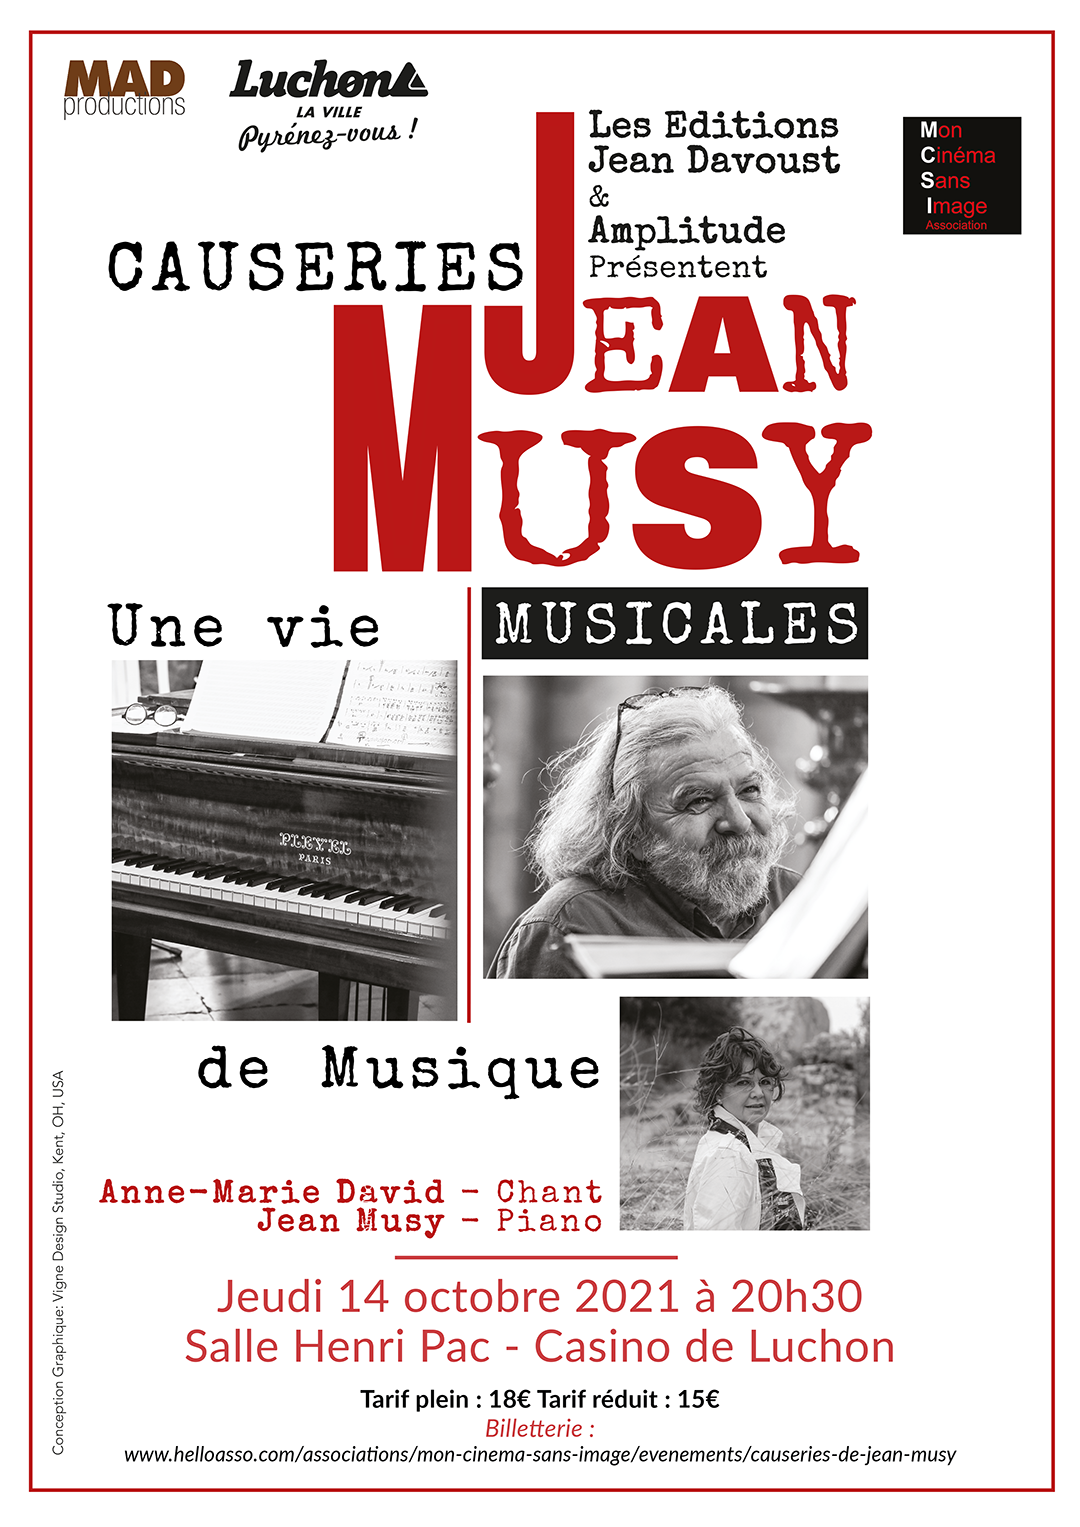 LES CAUSERY MUSICALES DE JEAN MUSY